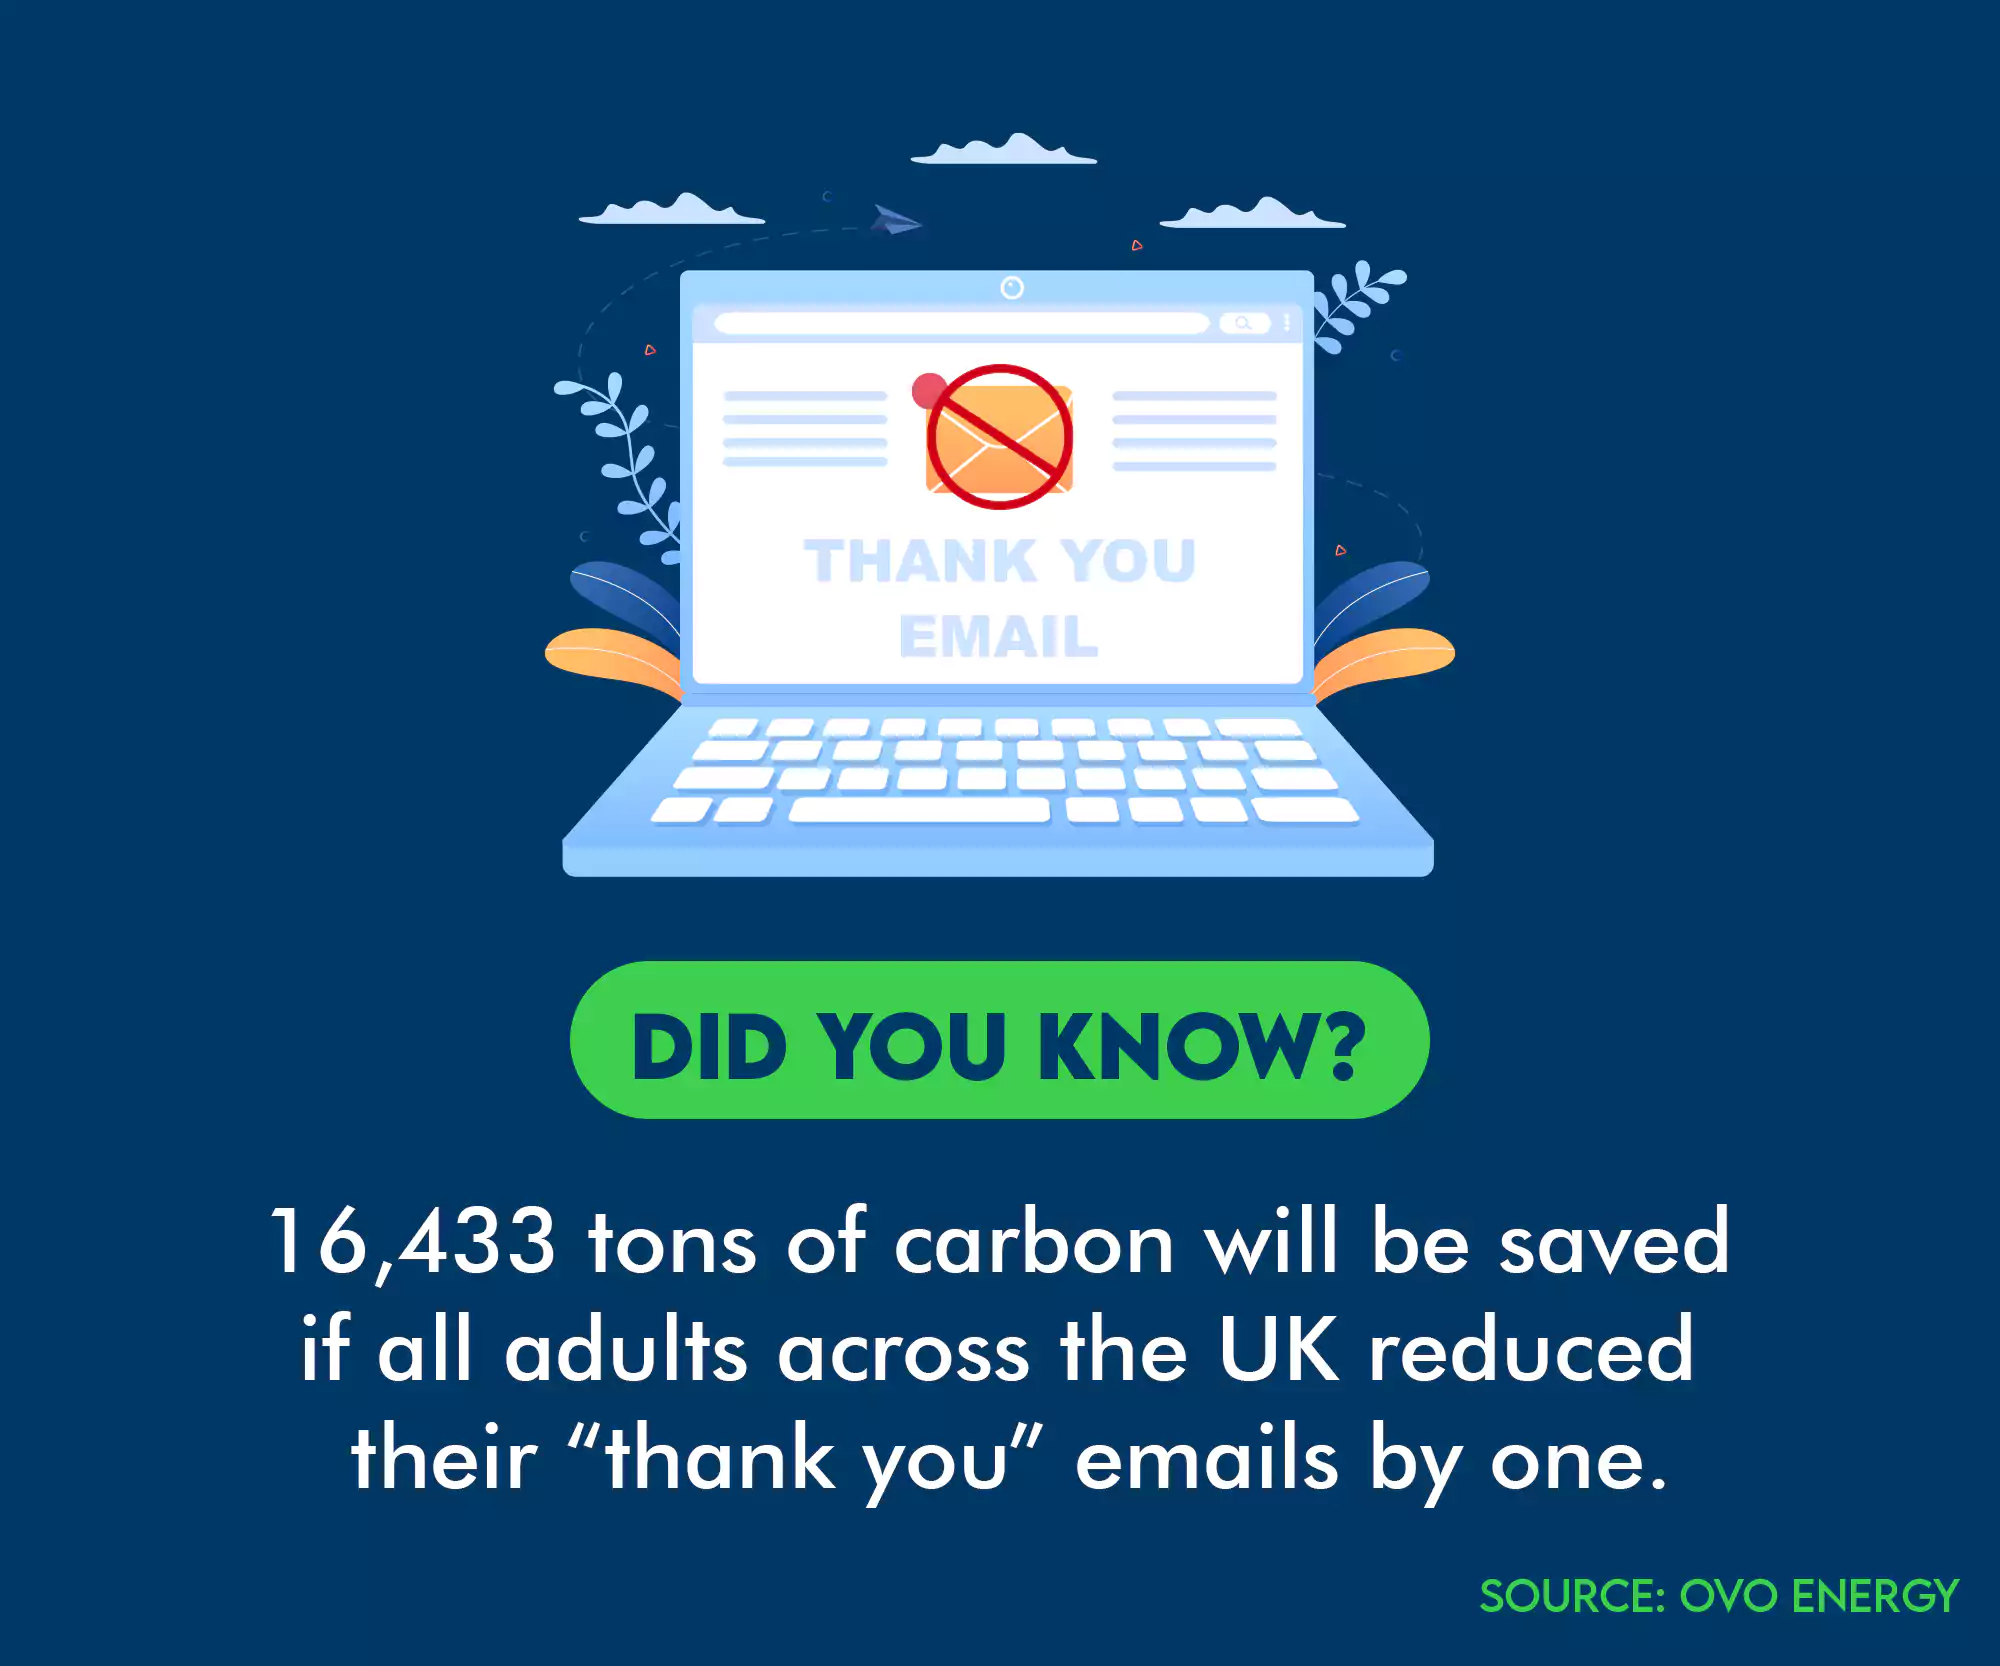 Digital carbon footprint of 'thank you' email